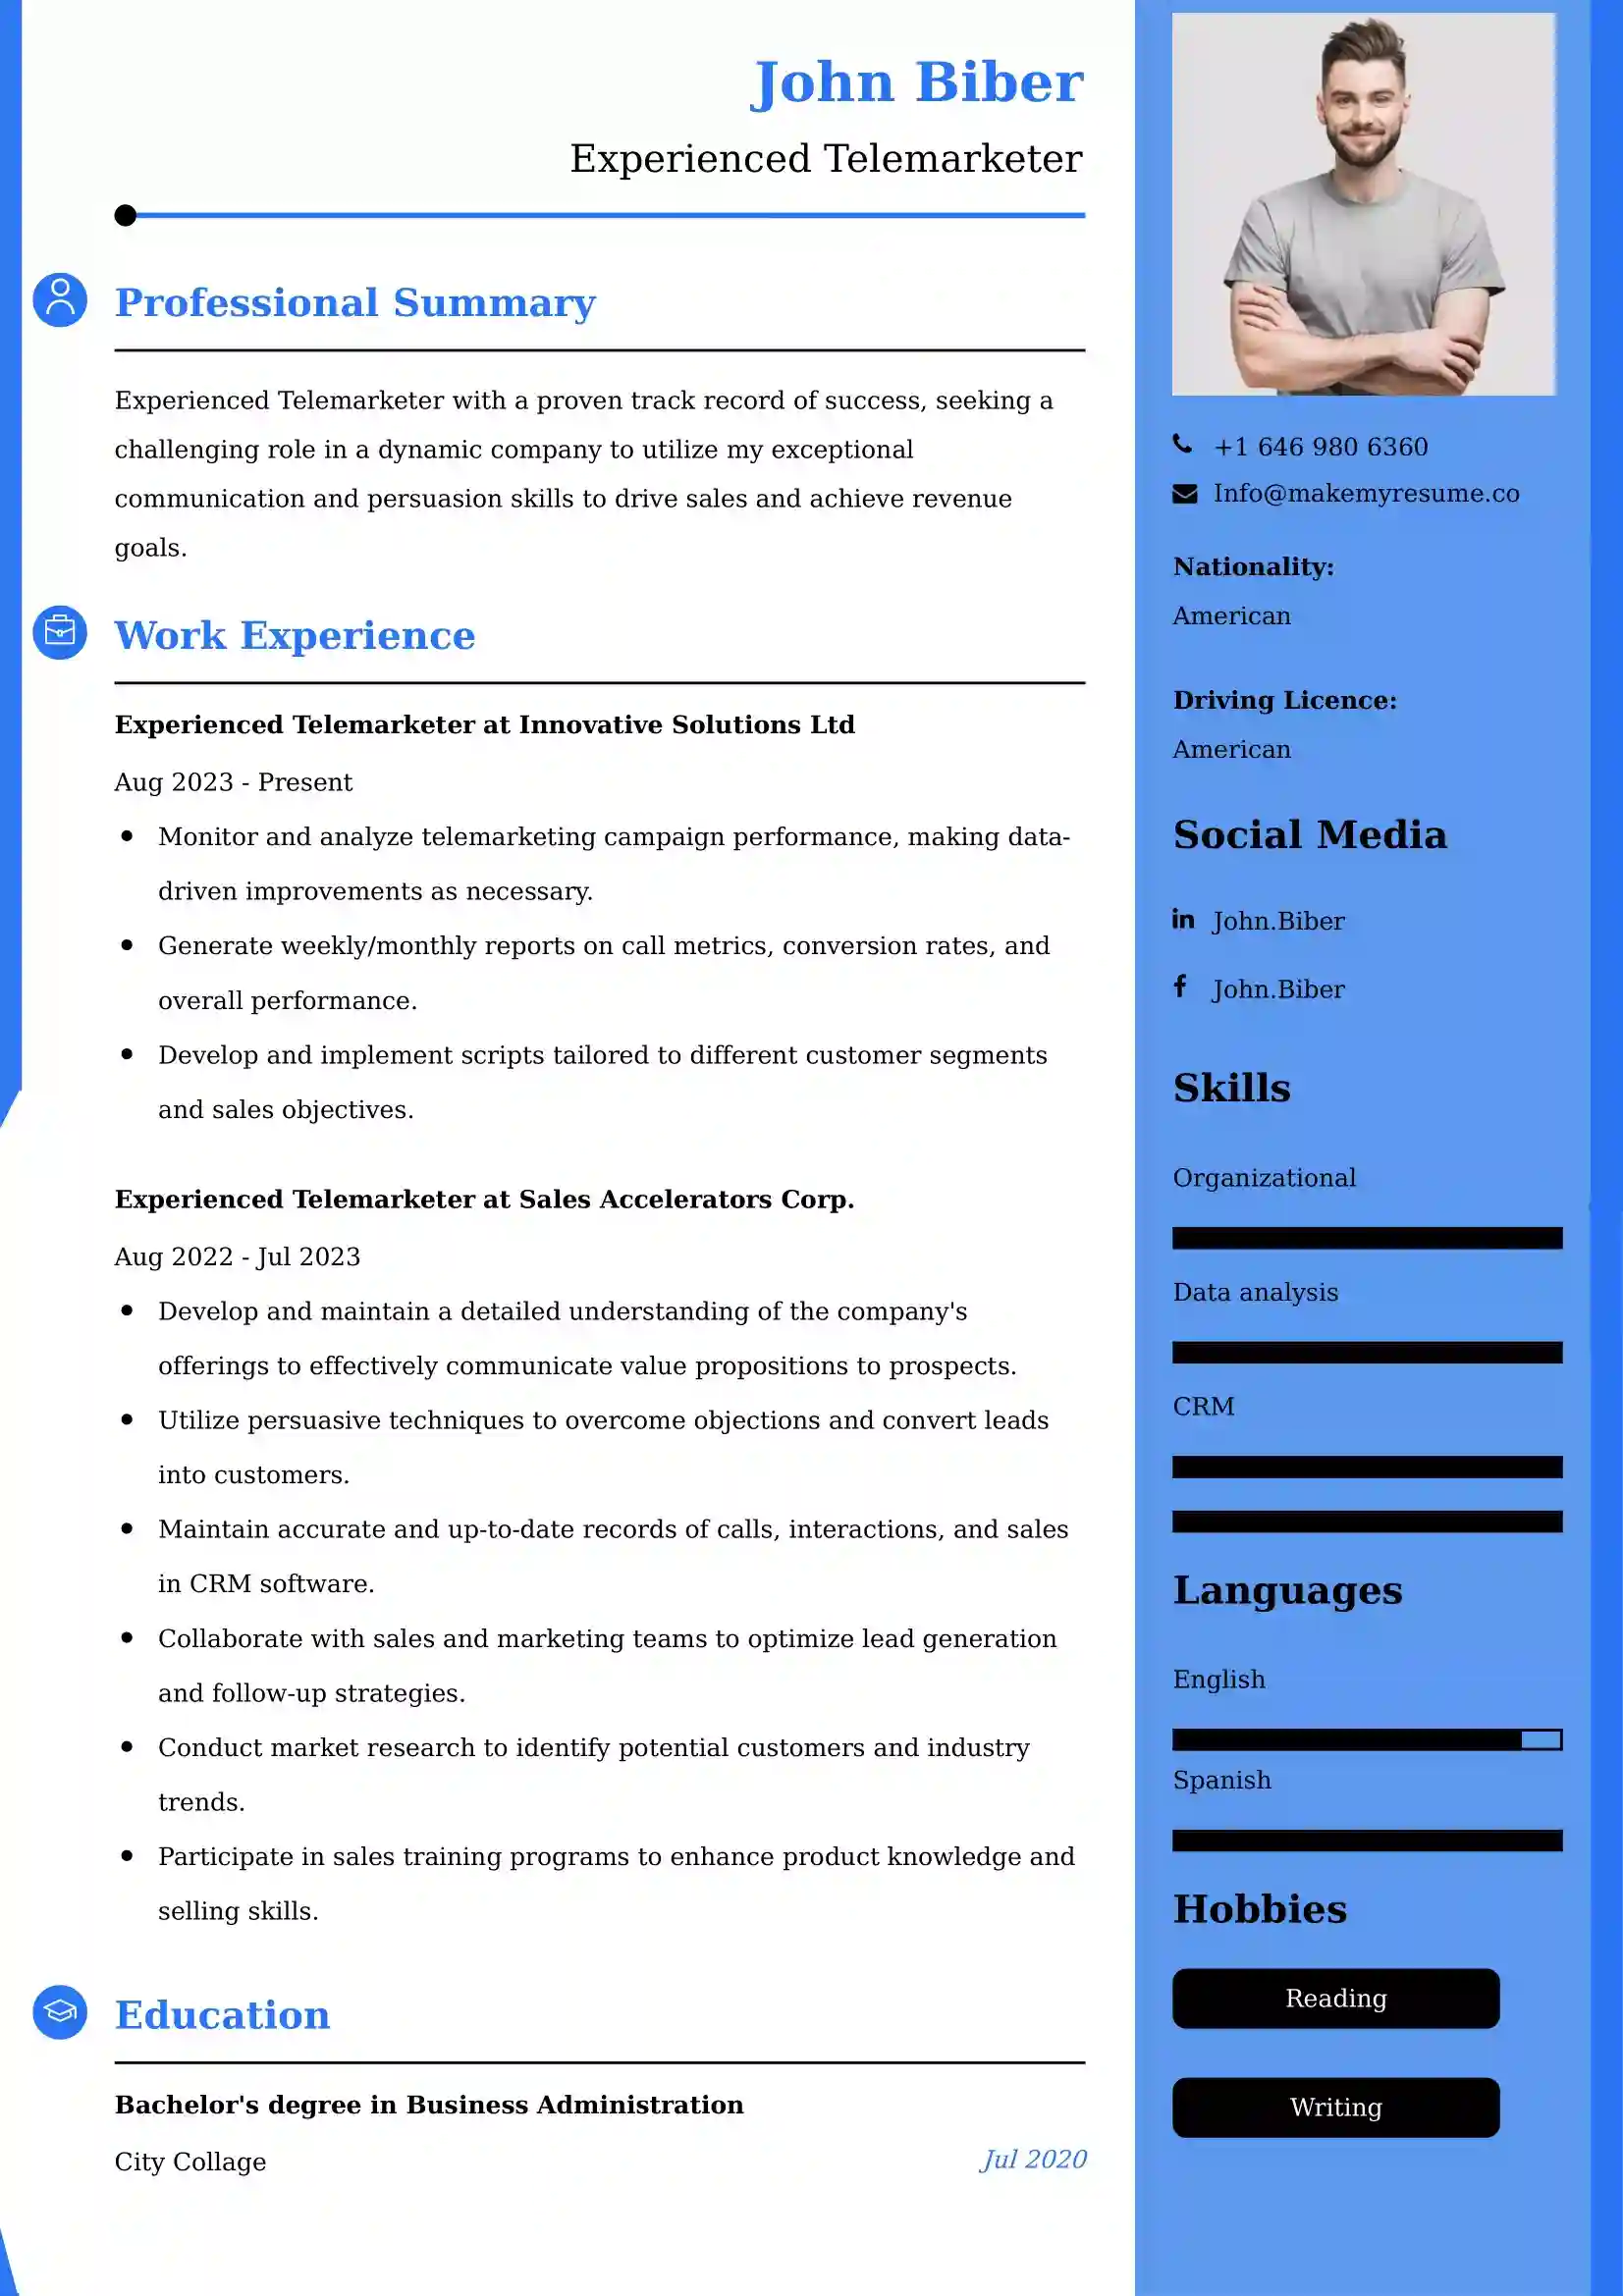 Best Experienced Telemarketer Resume Examples for UK